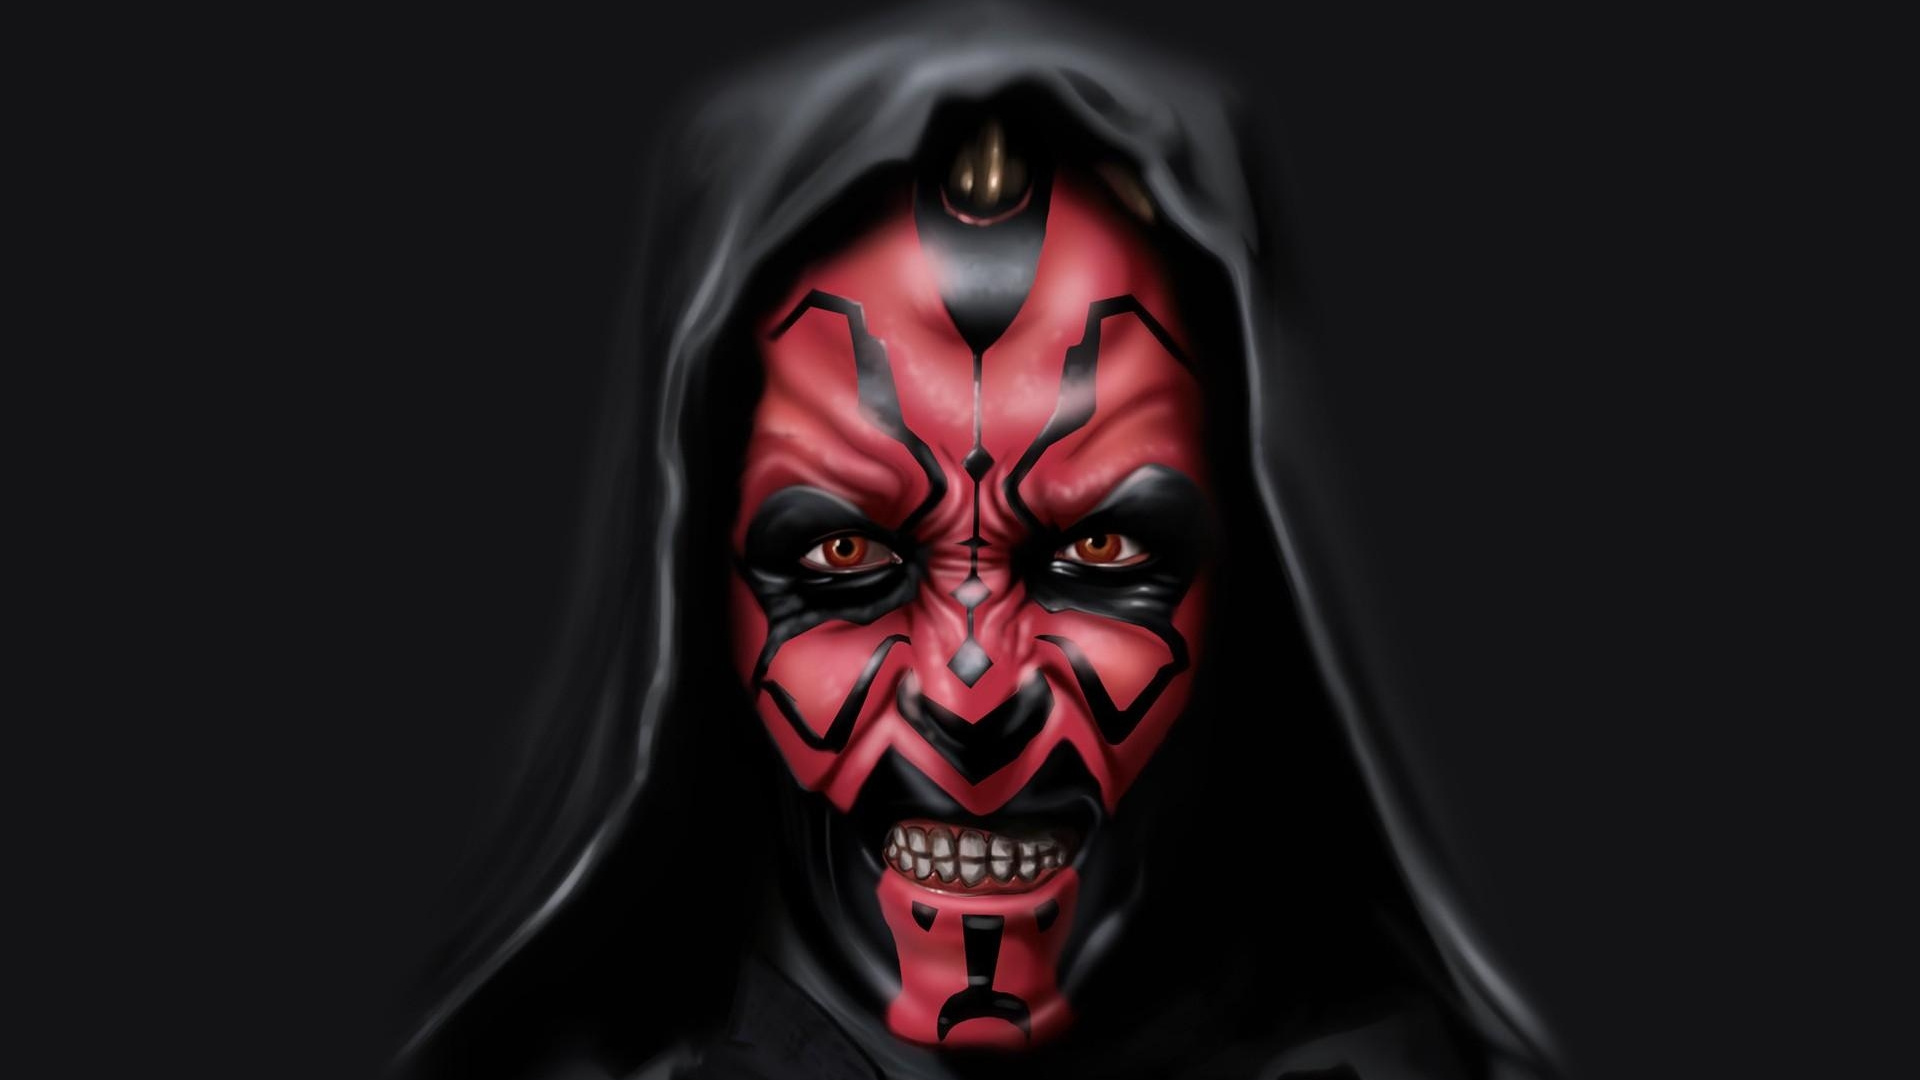 Red and Black Monster Face. Wallpaper in 1920x1080 Resolution